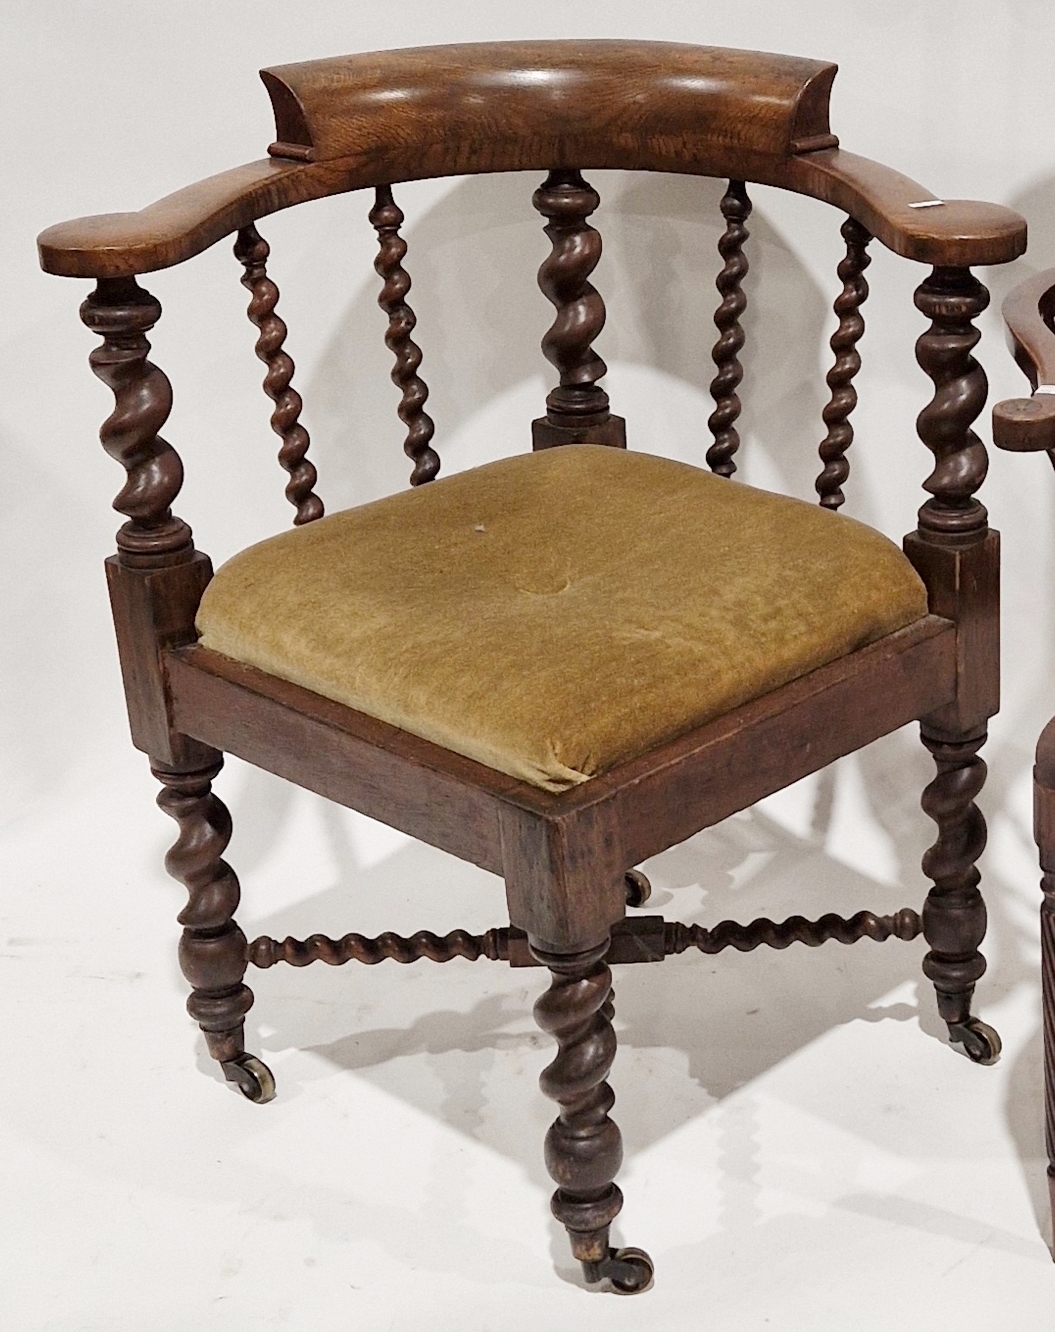 Late 19th/early 20th century oak corner chair with carved spiral supports and X-frame stretcher,